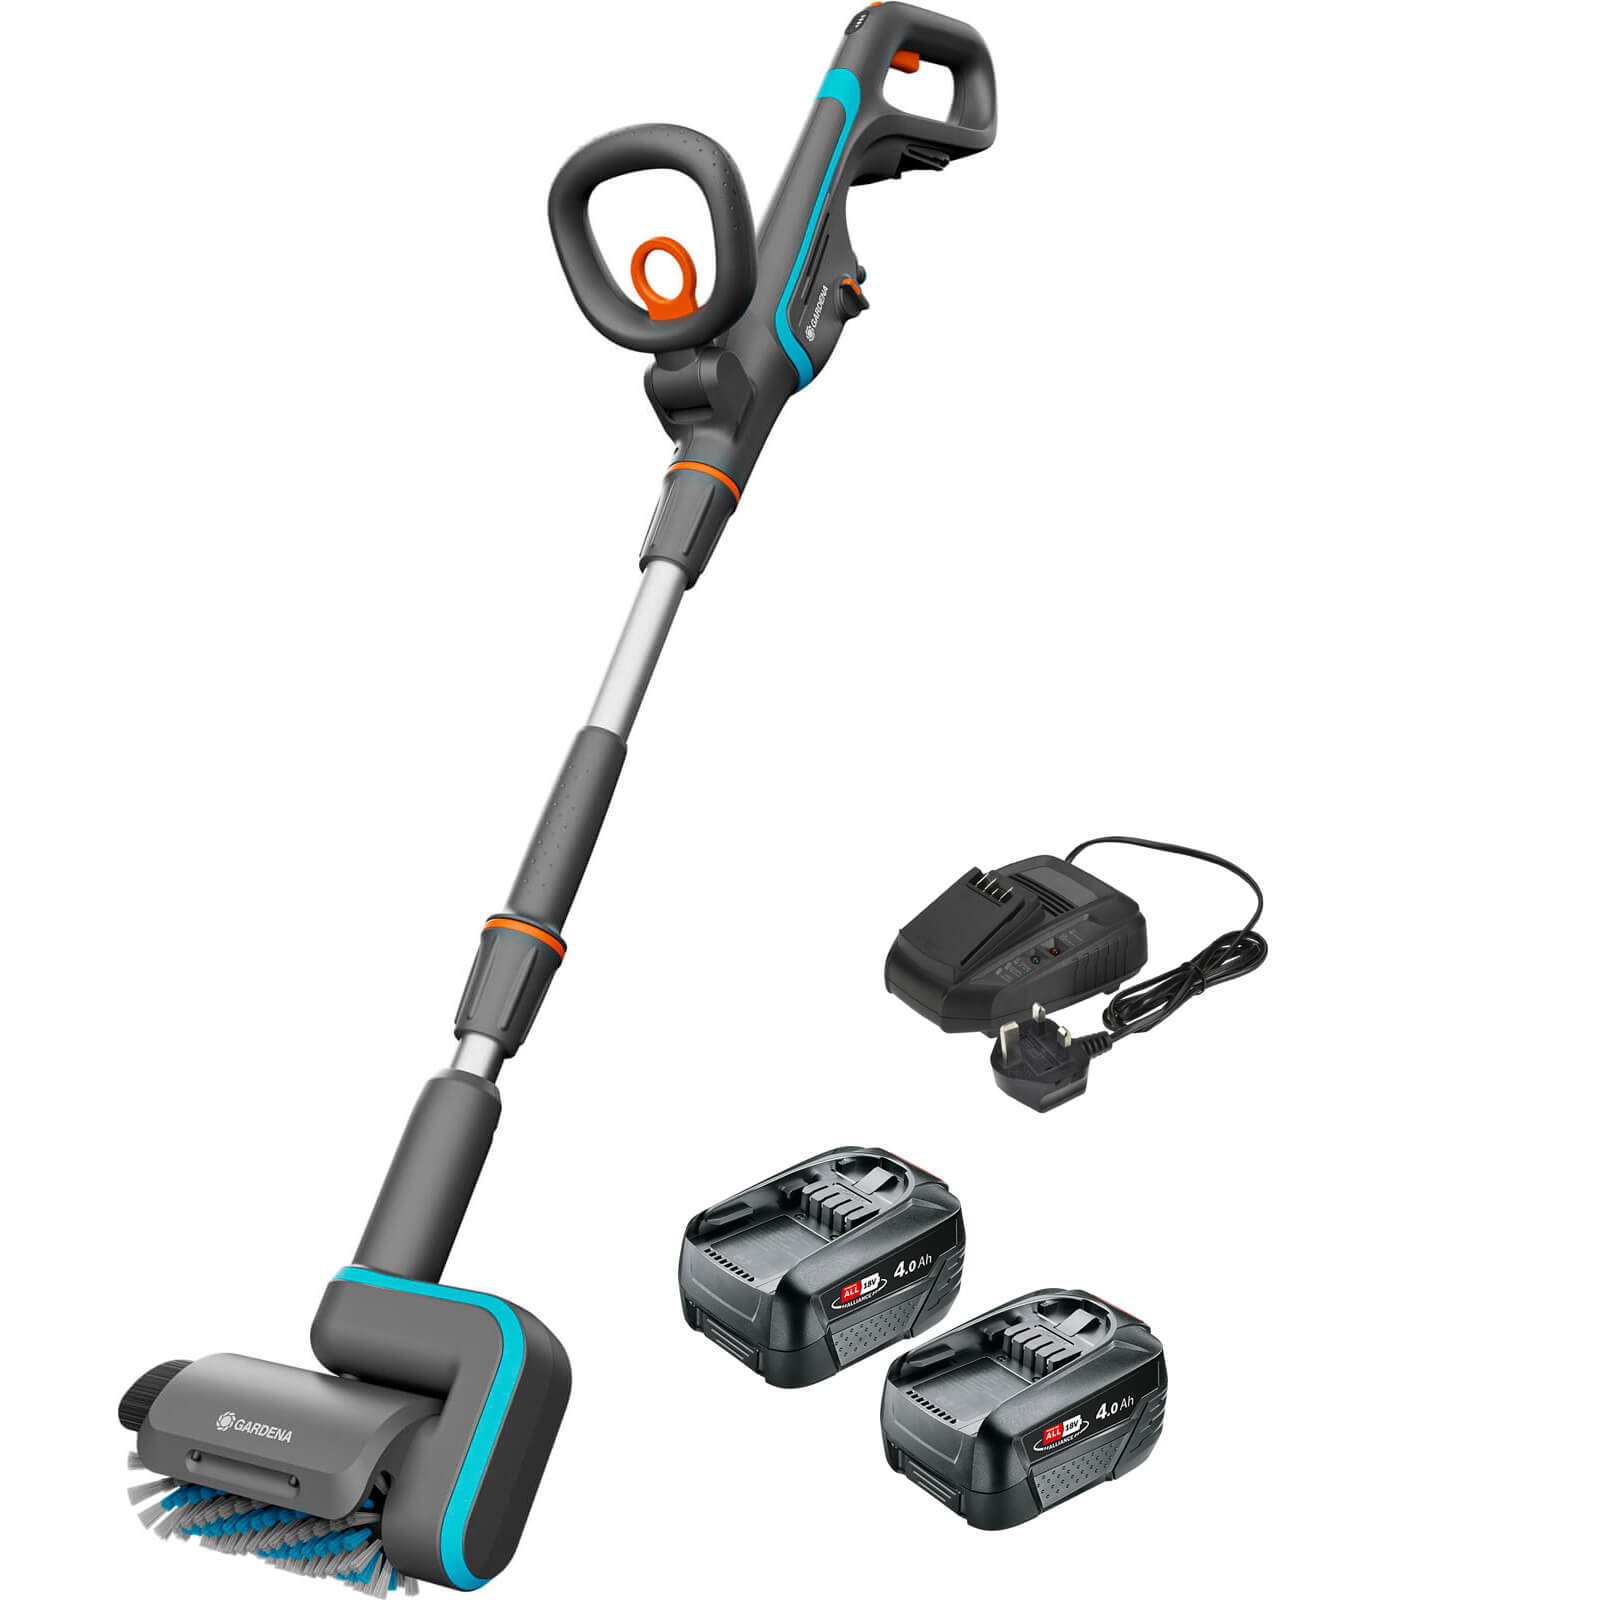 Gardena AQUABRUSH P4A 18v Cordless Patio and Surface Cleaner 2 x 4ah Li-ion Charger